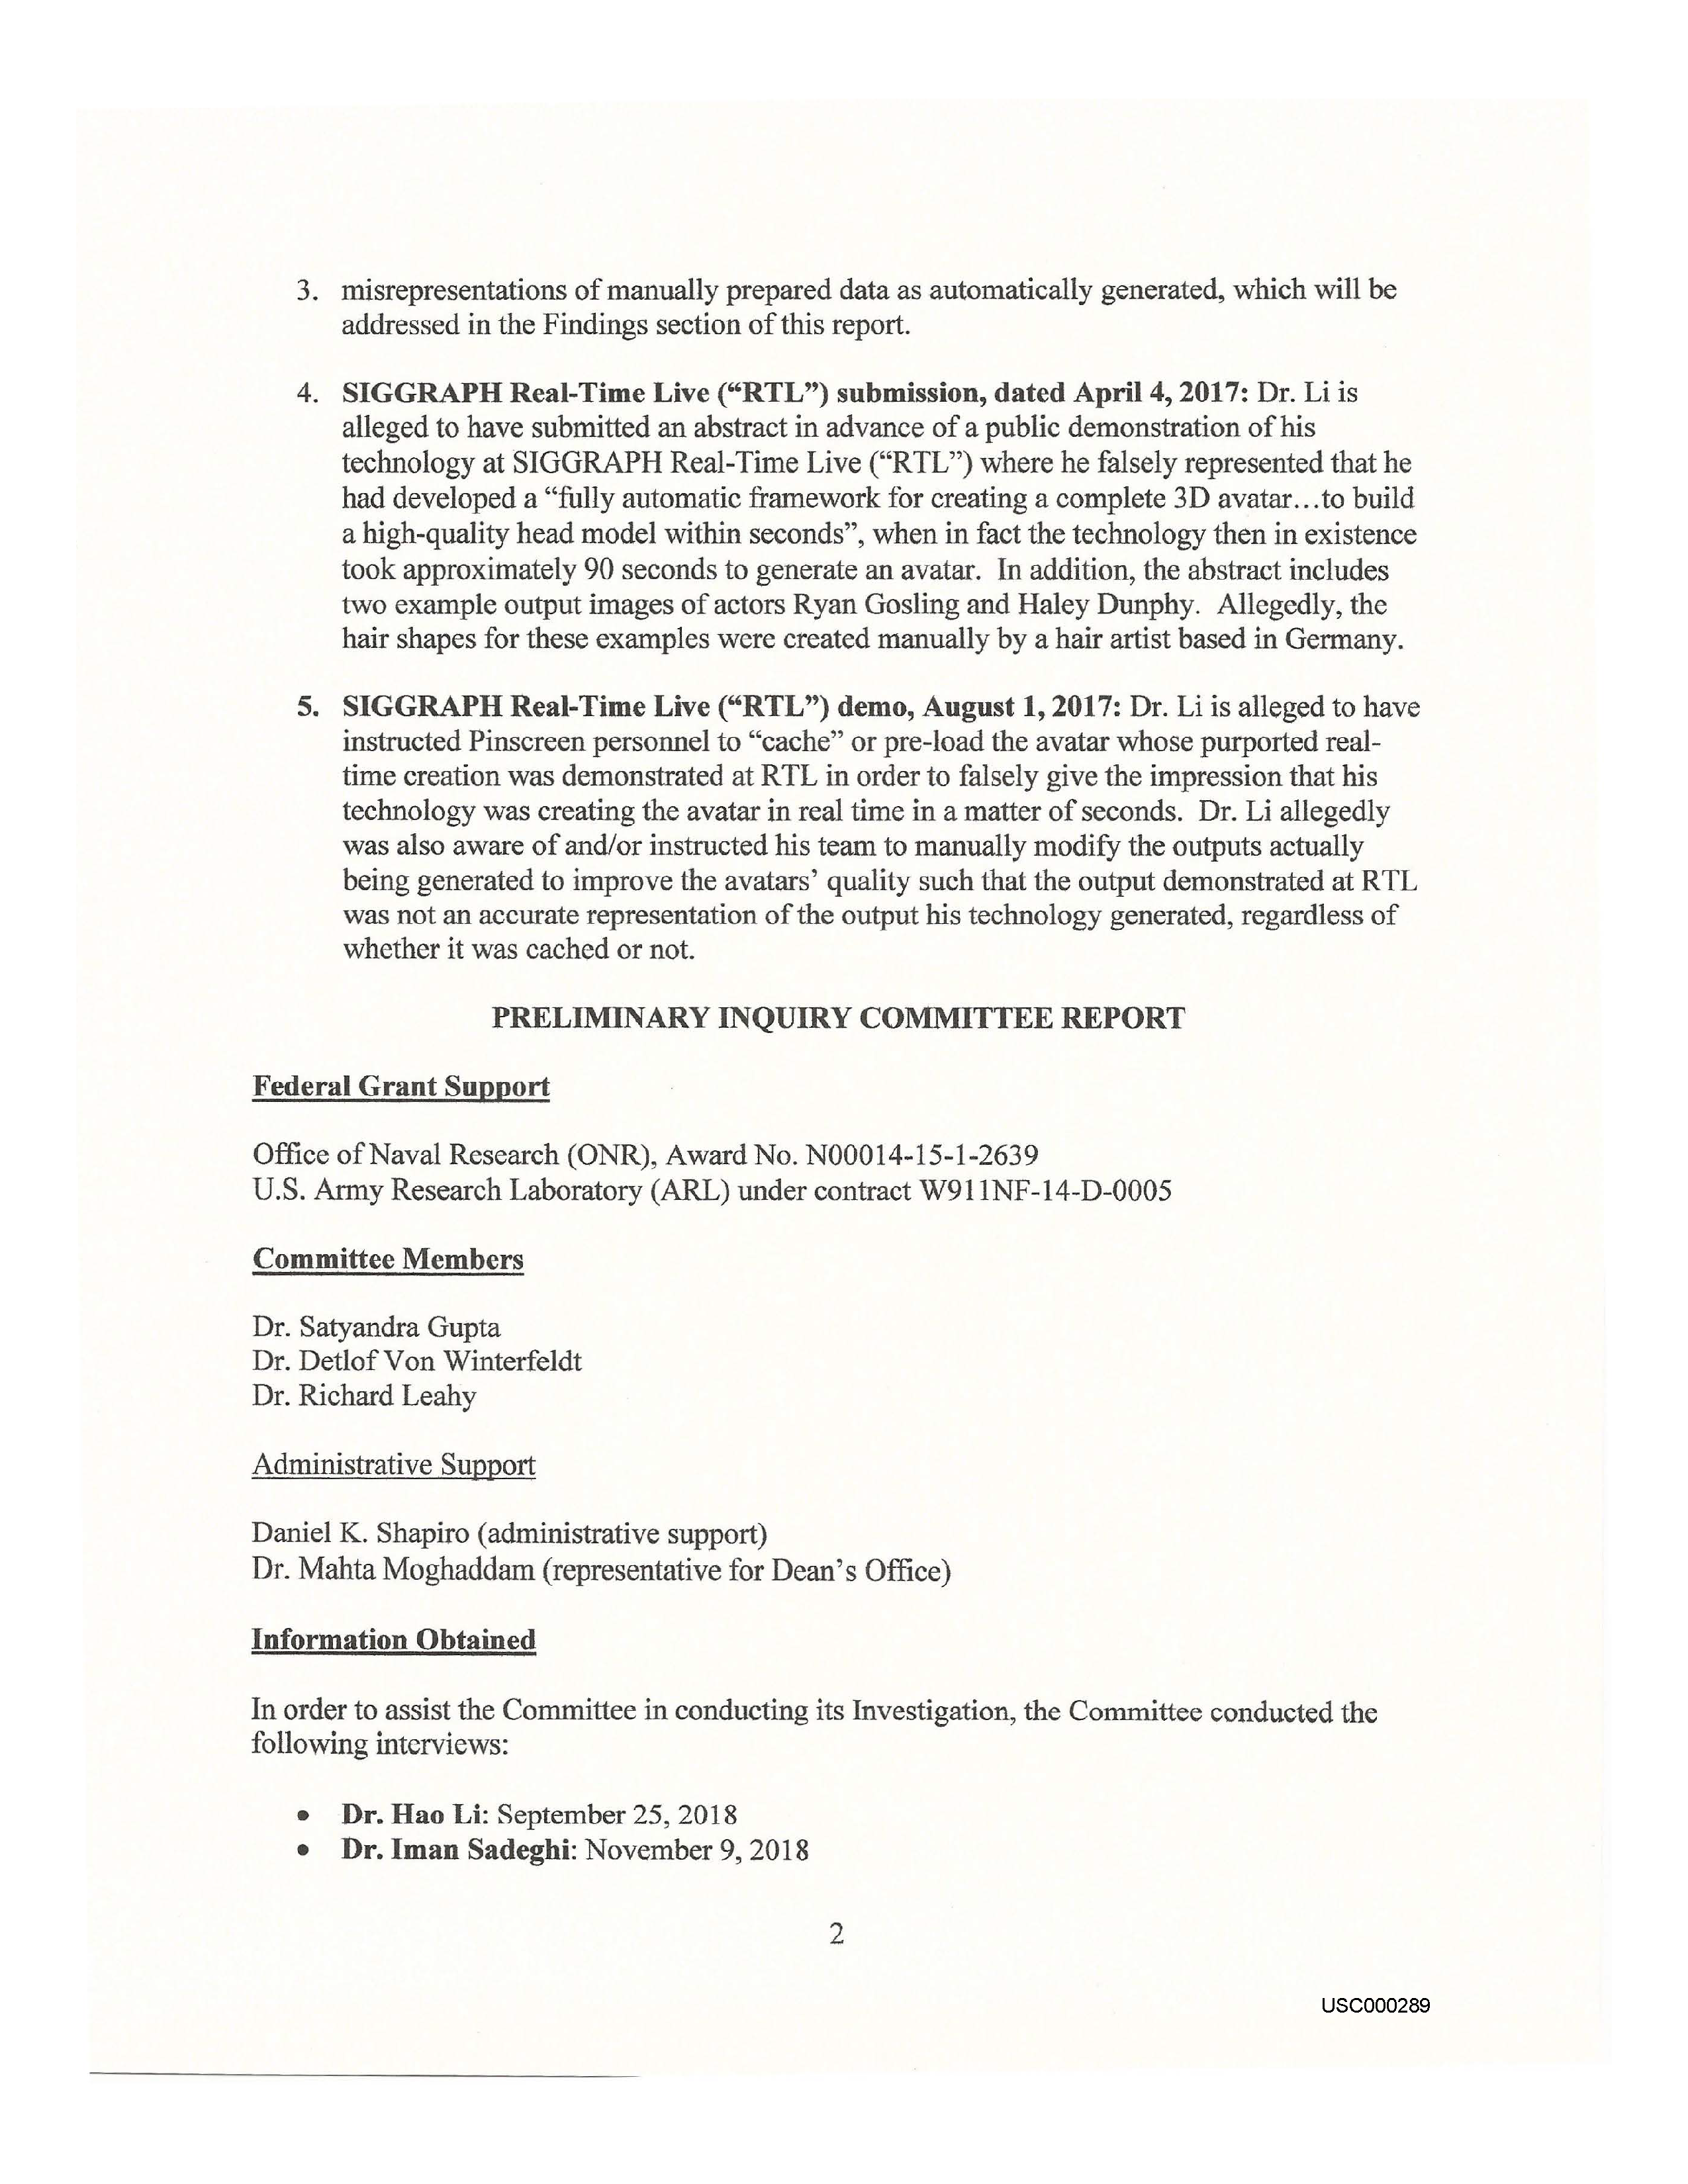 USC's Investigation Report re Hao Li's and Pinscreen's Scientific Misconduct at ACM SIGGRAPH RTL 2017 [Summary] Page 19